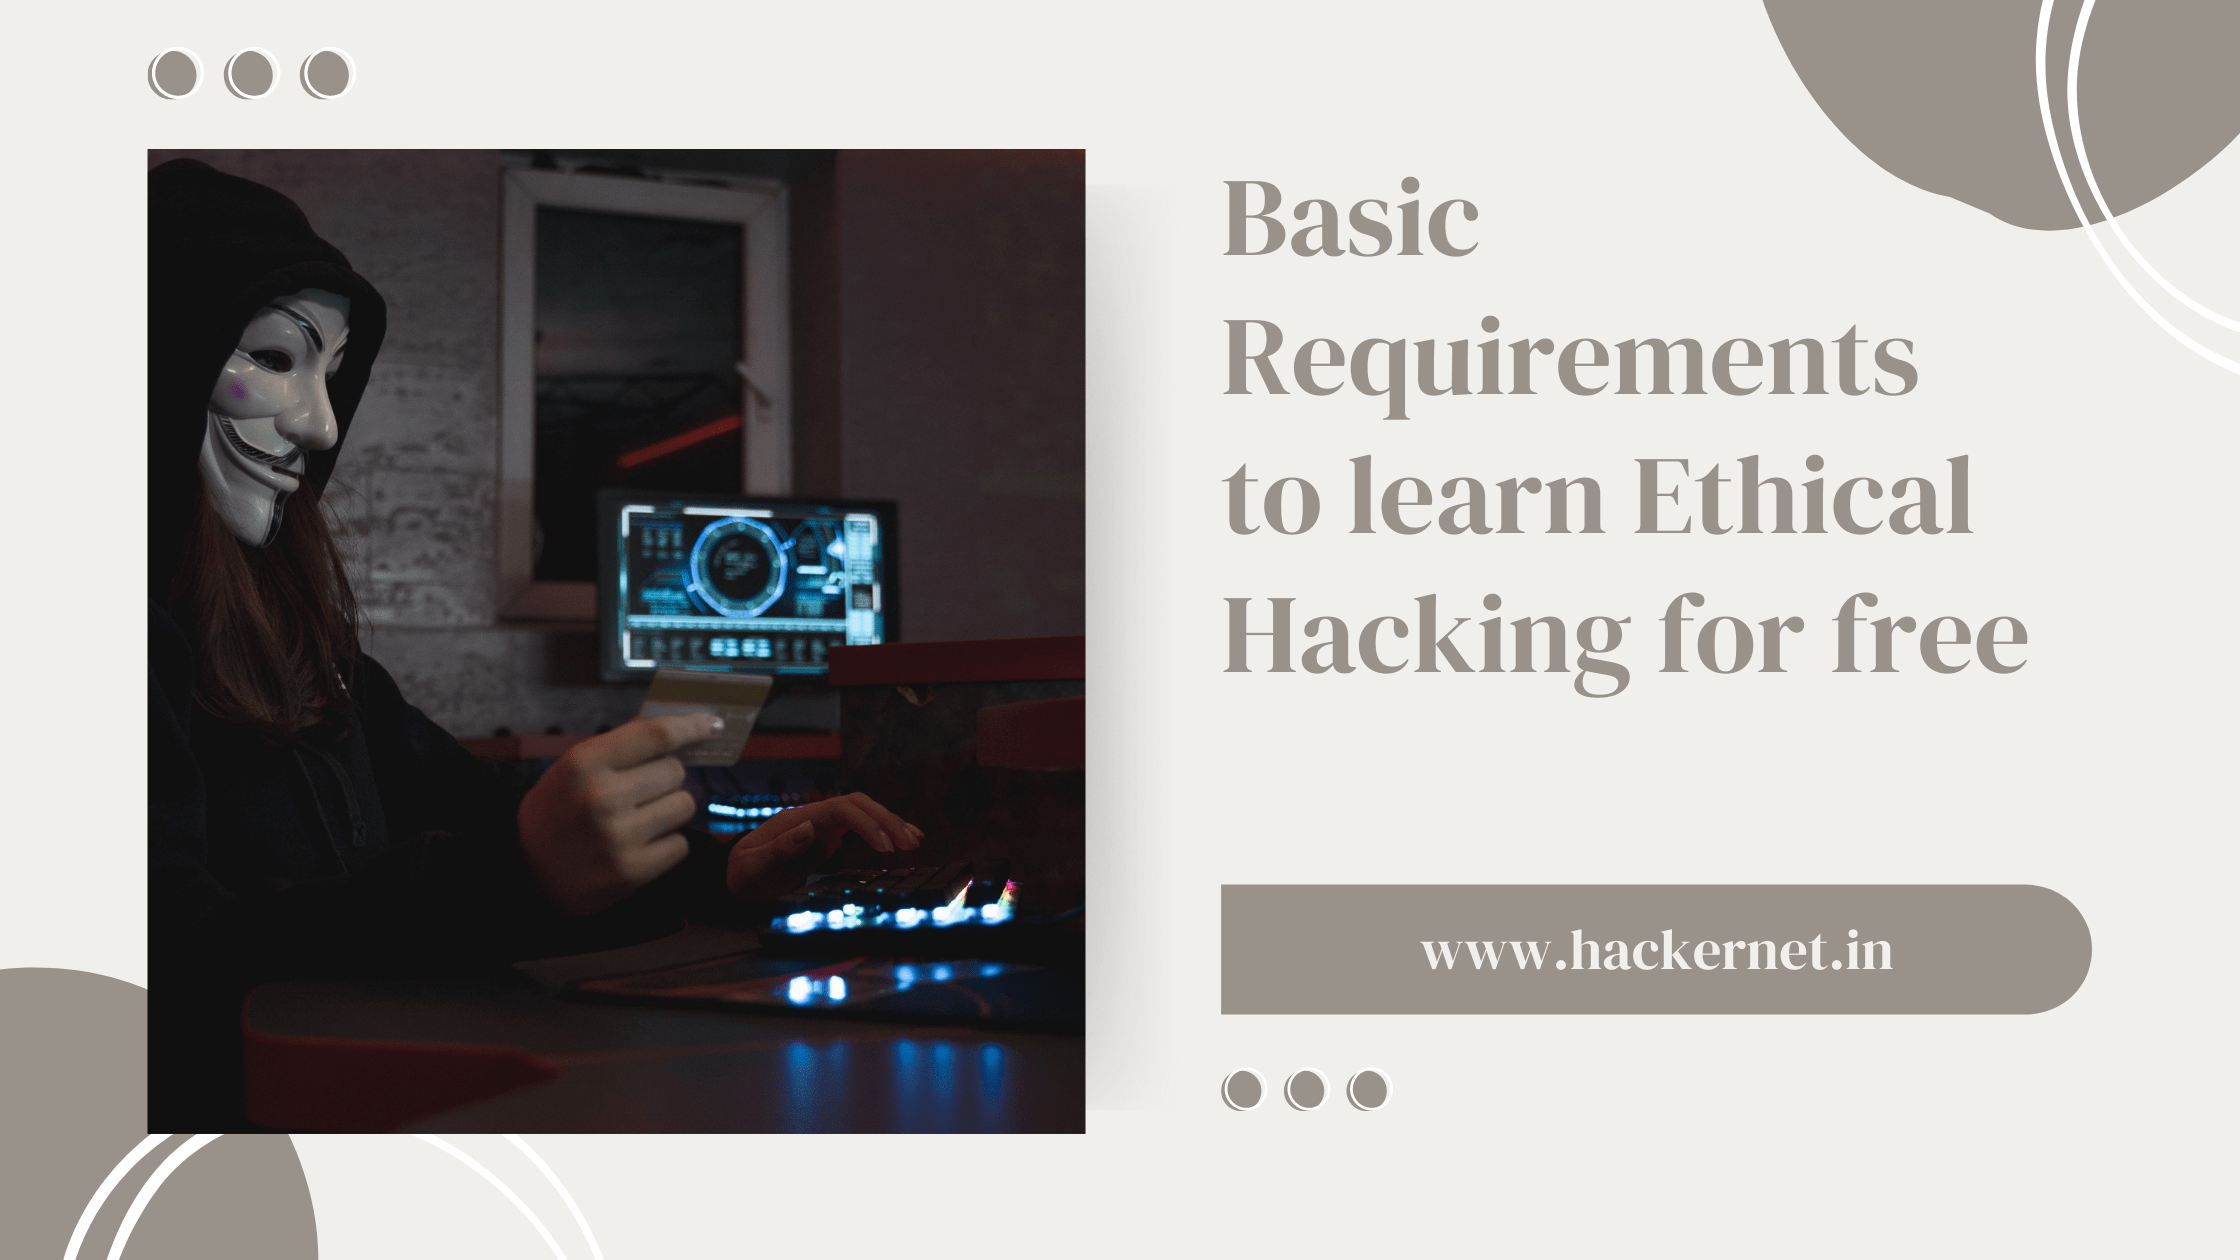 Basic Requirements to learn Ethical Hacking for free